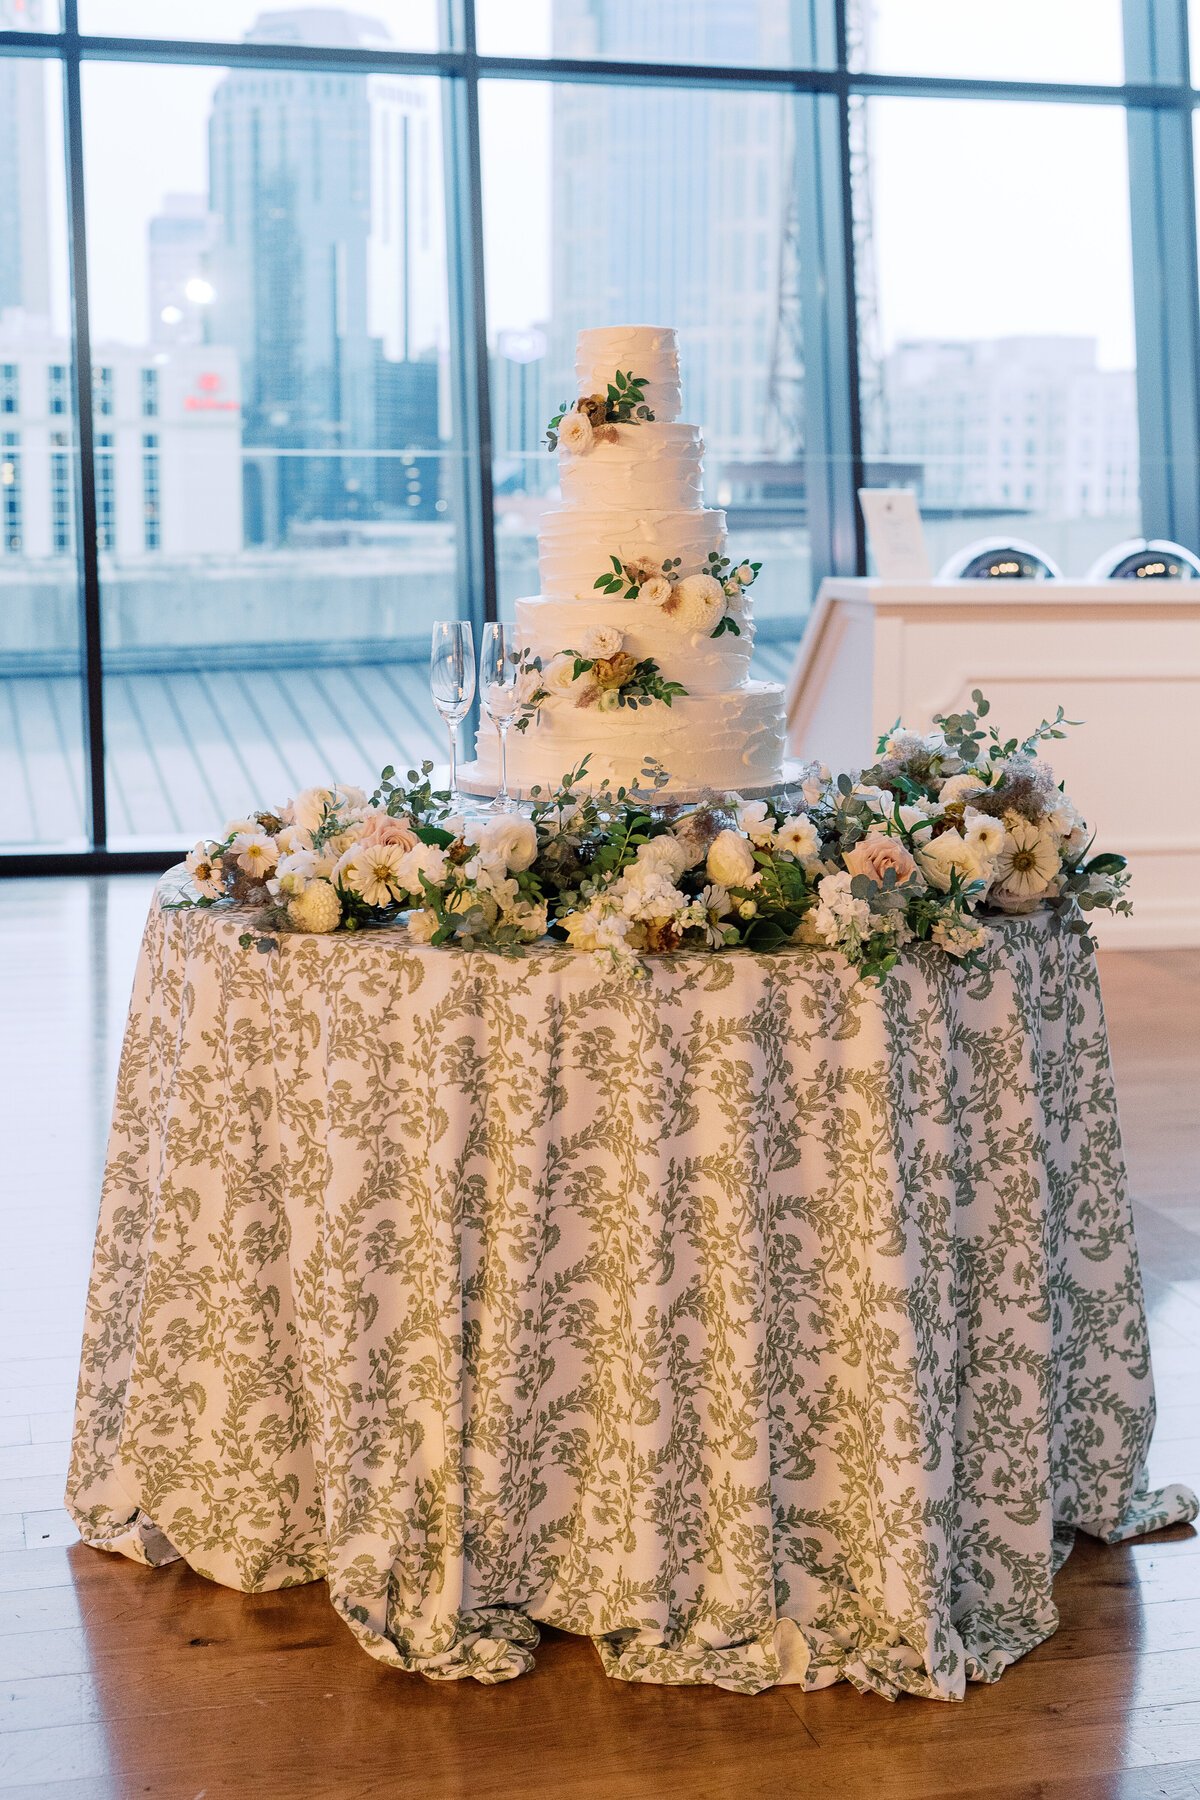 Elegant cake flowers for timeless garden-inspired summer wedding. Classic white, cream, and green floral colors accent multi-tiered cake in downtown Nashville. Design by Rosemary & Finch Floral Design.